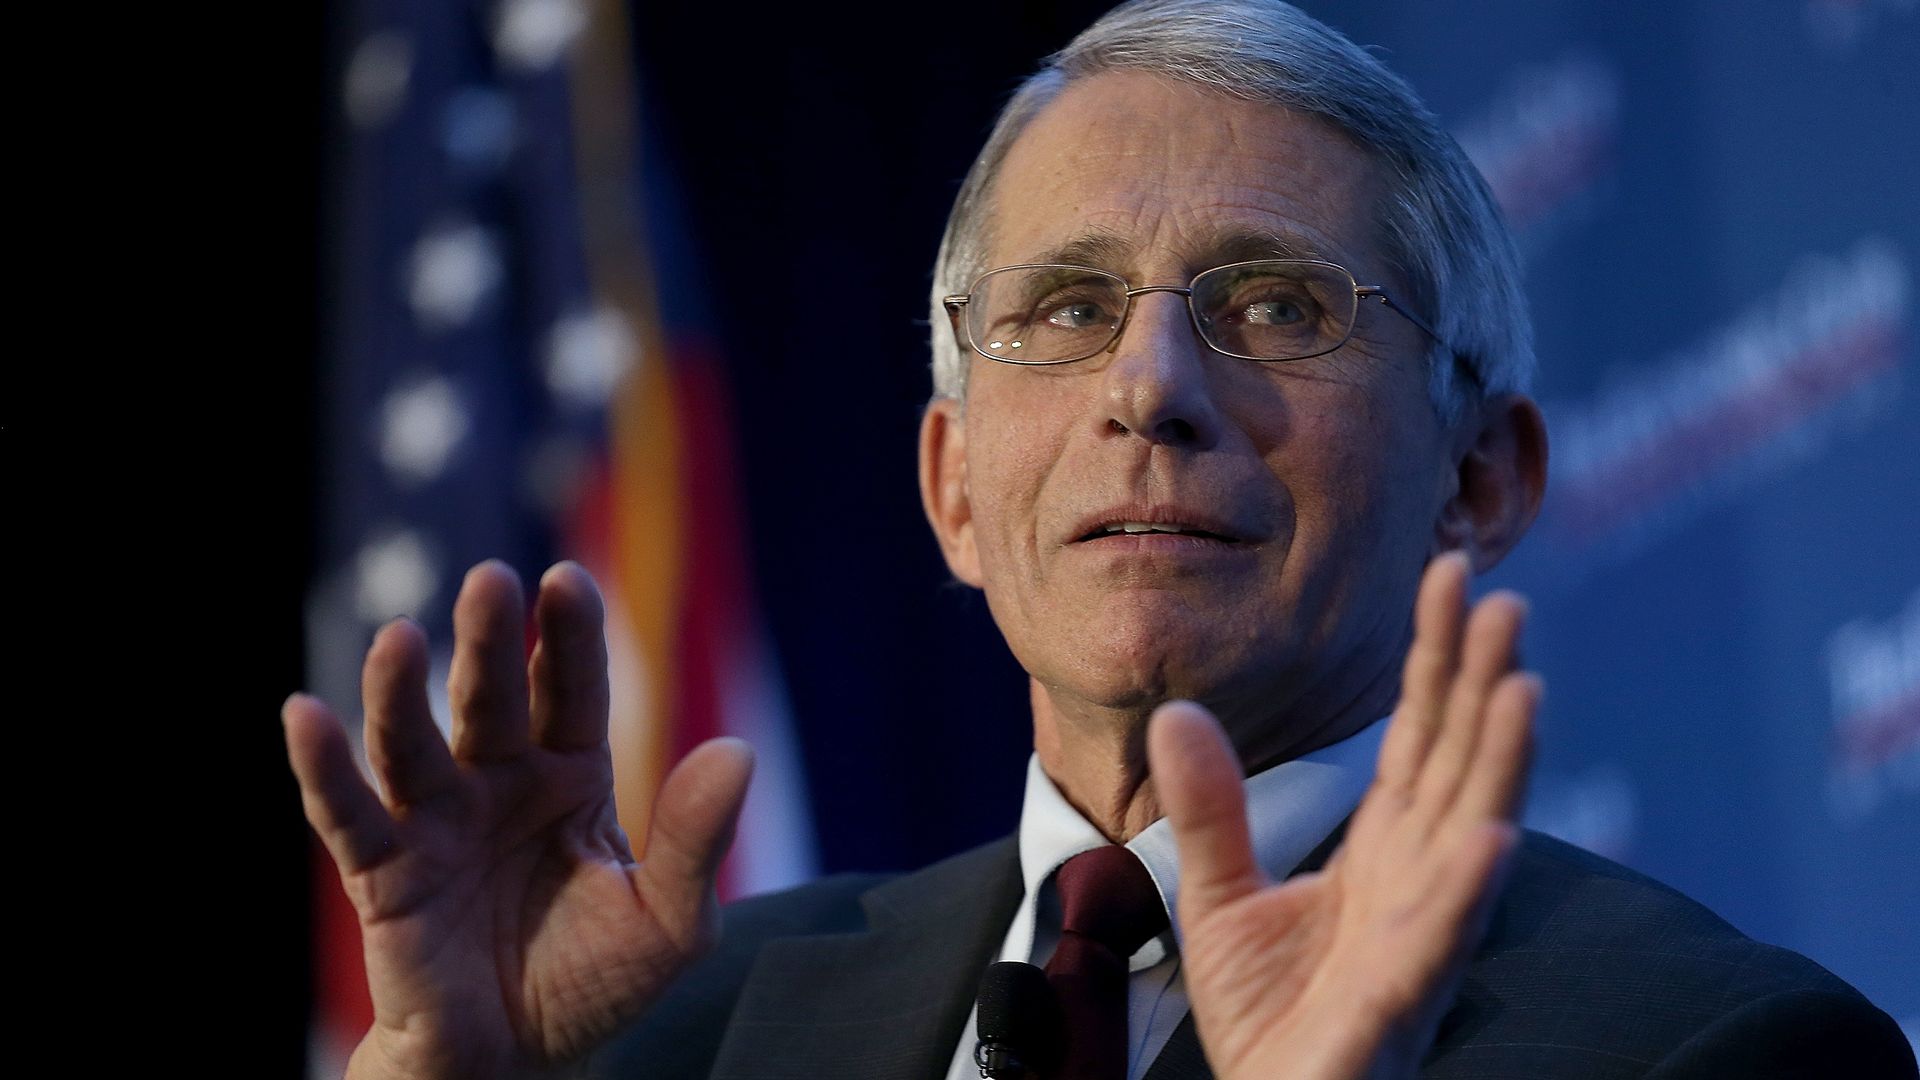 Dr. Anthony Fauci, director of the National Institute of Allergy and Infectious Diseases,